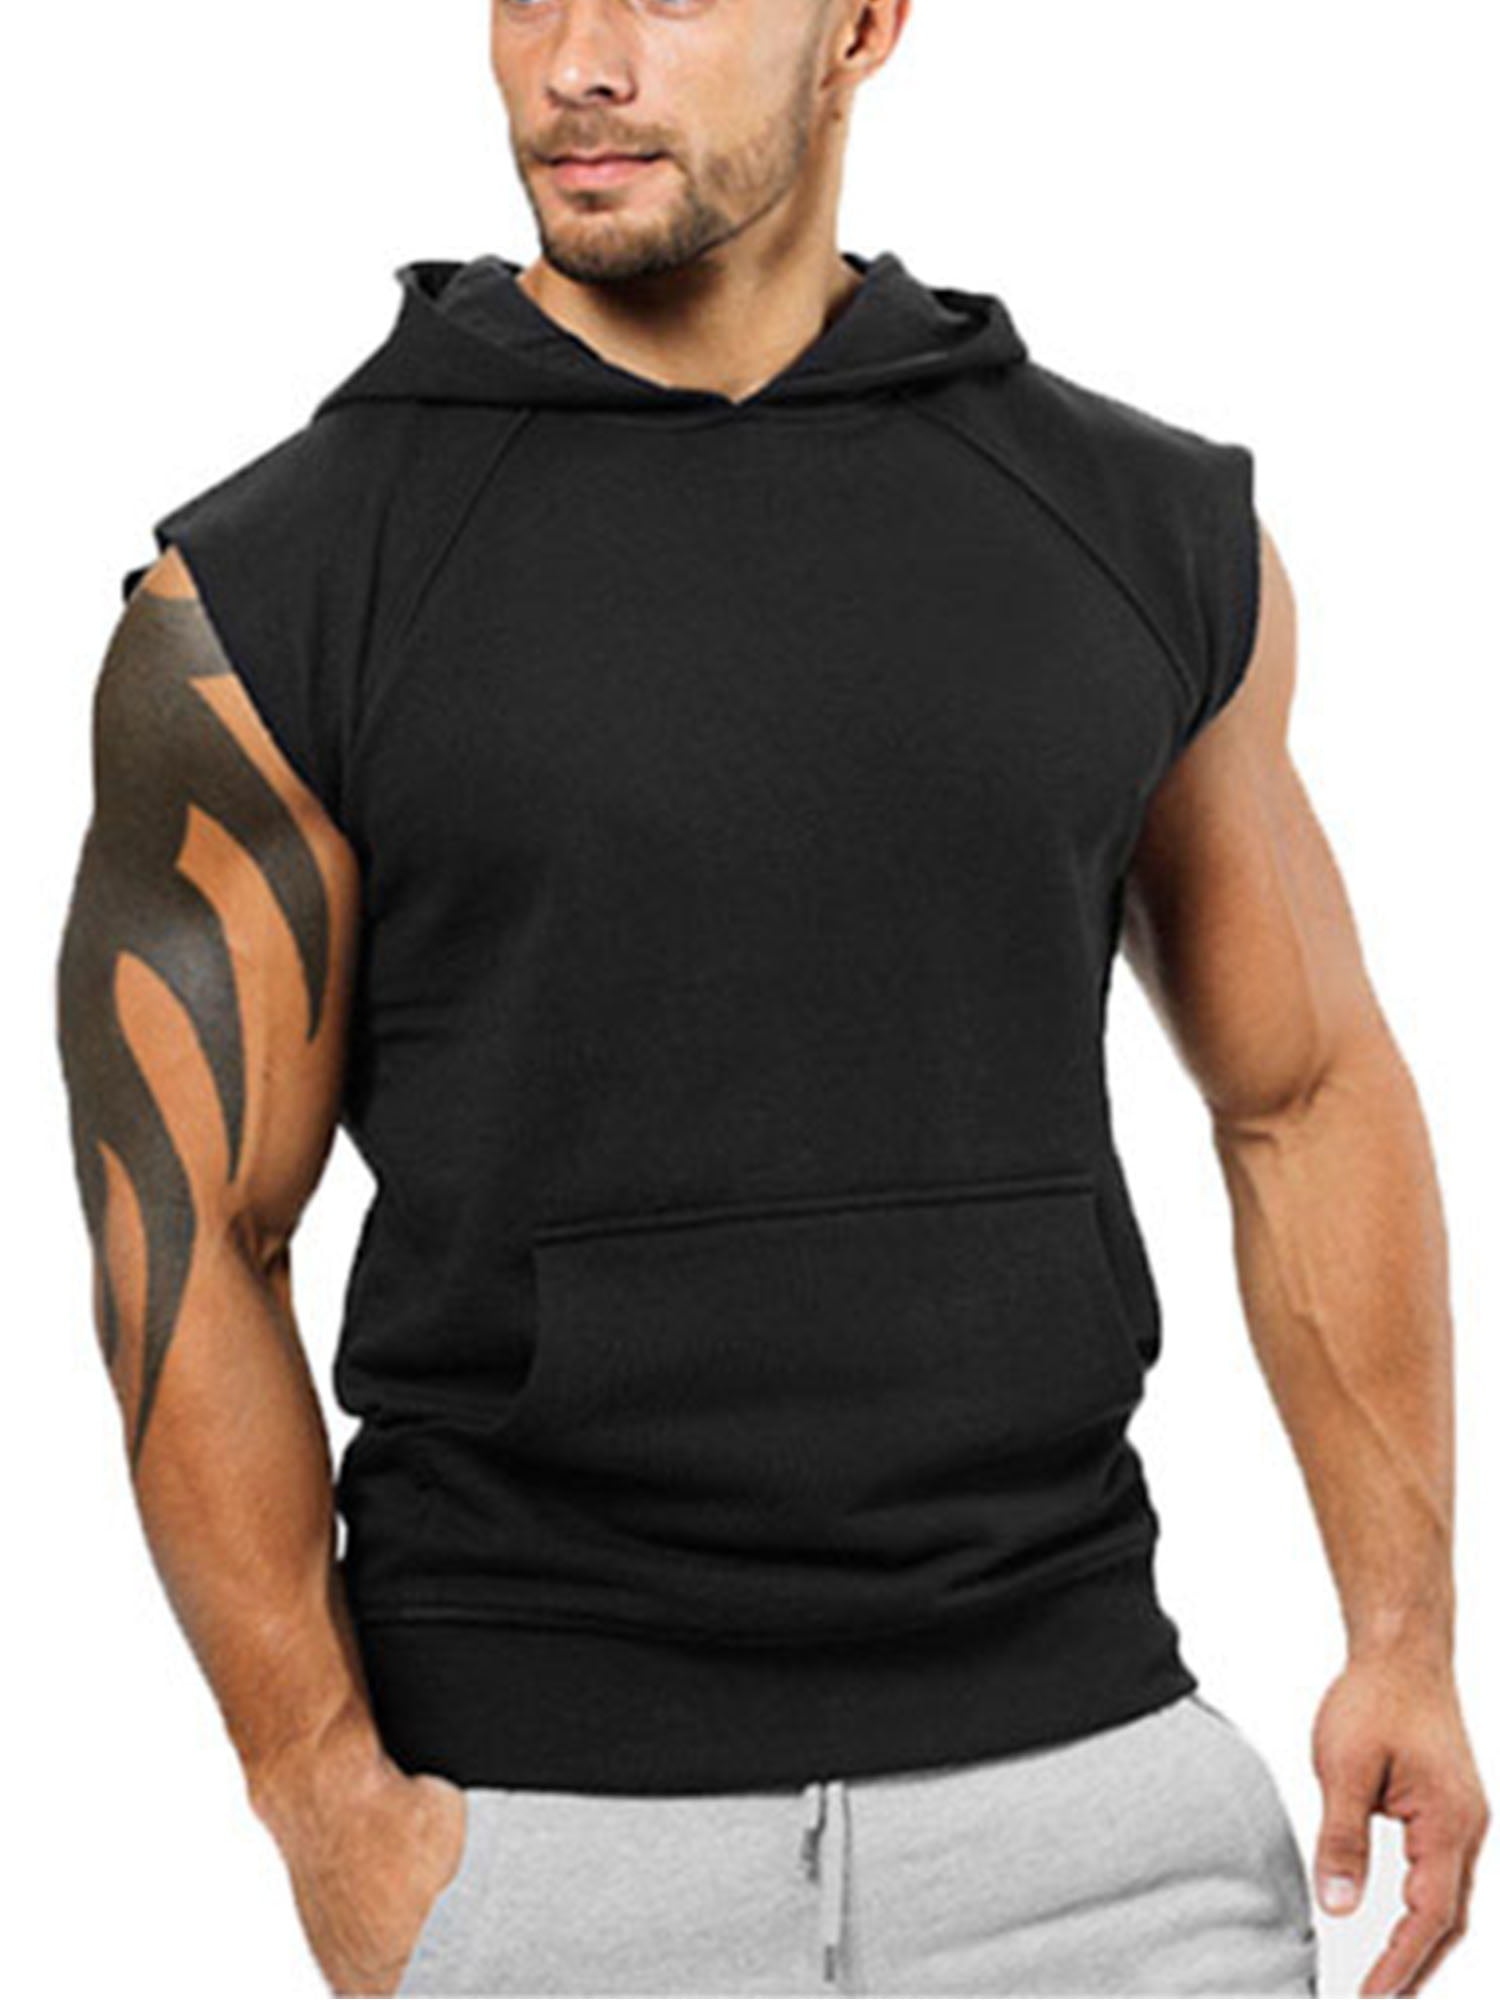 Men's Gym Vest Sleeveless Pullover Hoody Hooded Tank Tops Muscle Clothes Shirt. 